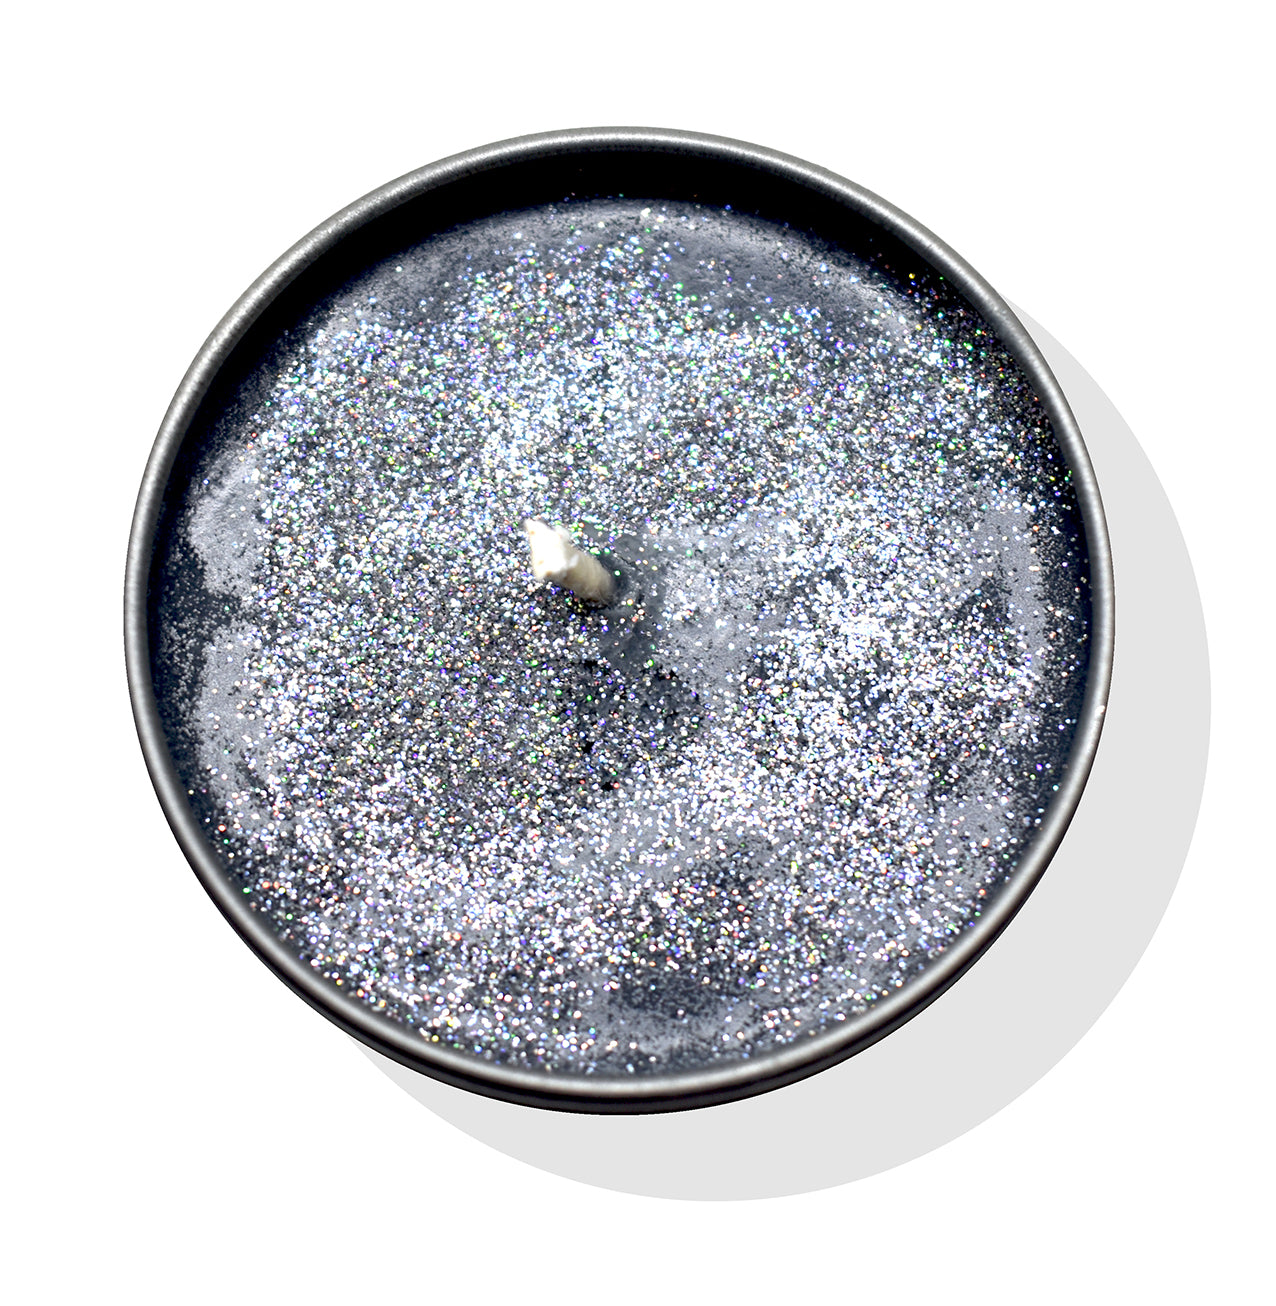 top view of candle which shows it;s a black candle with super fine eco glitter at the top